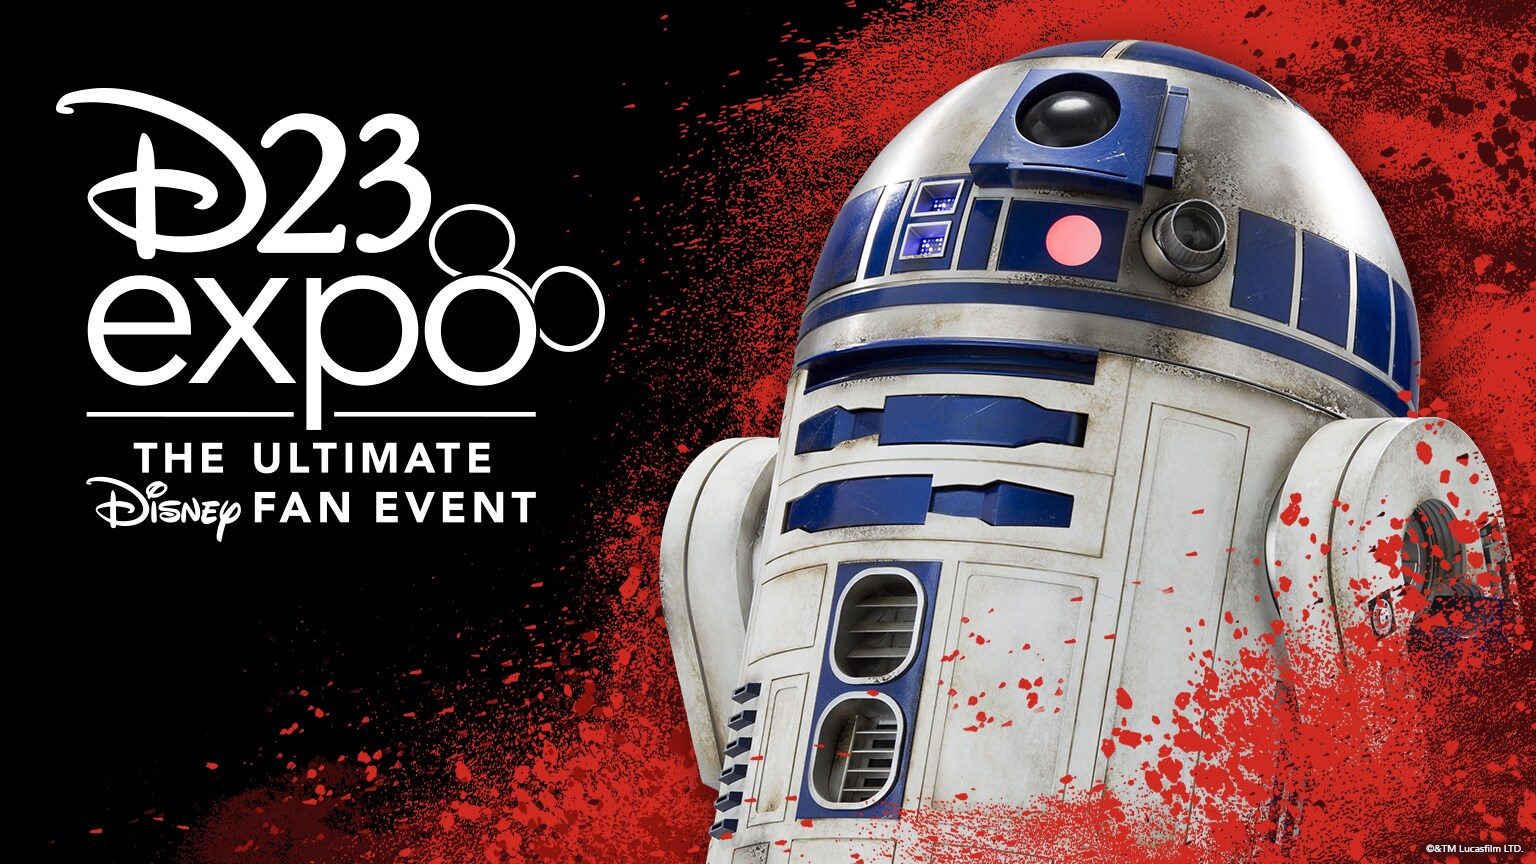 D23 Expo 2019 Tickets Now On Sale!